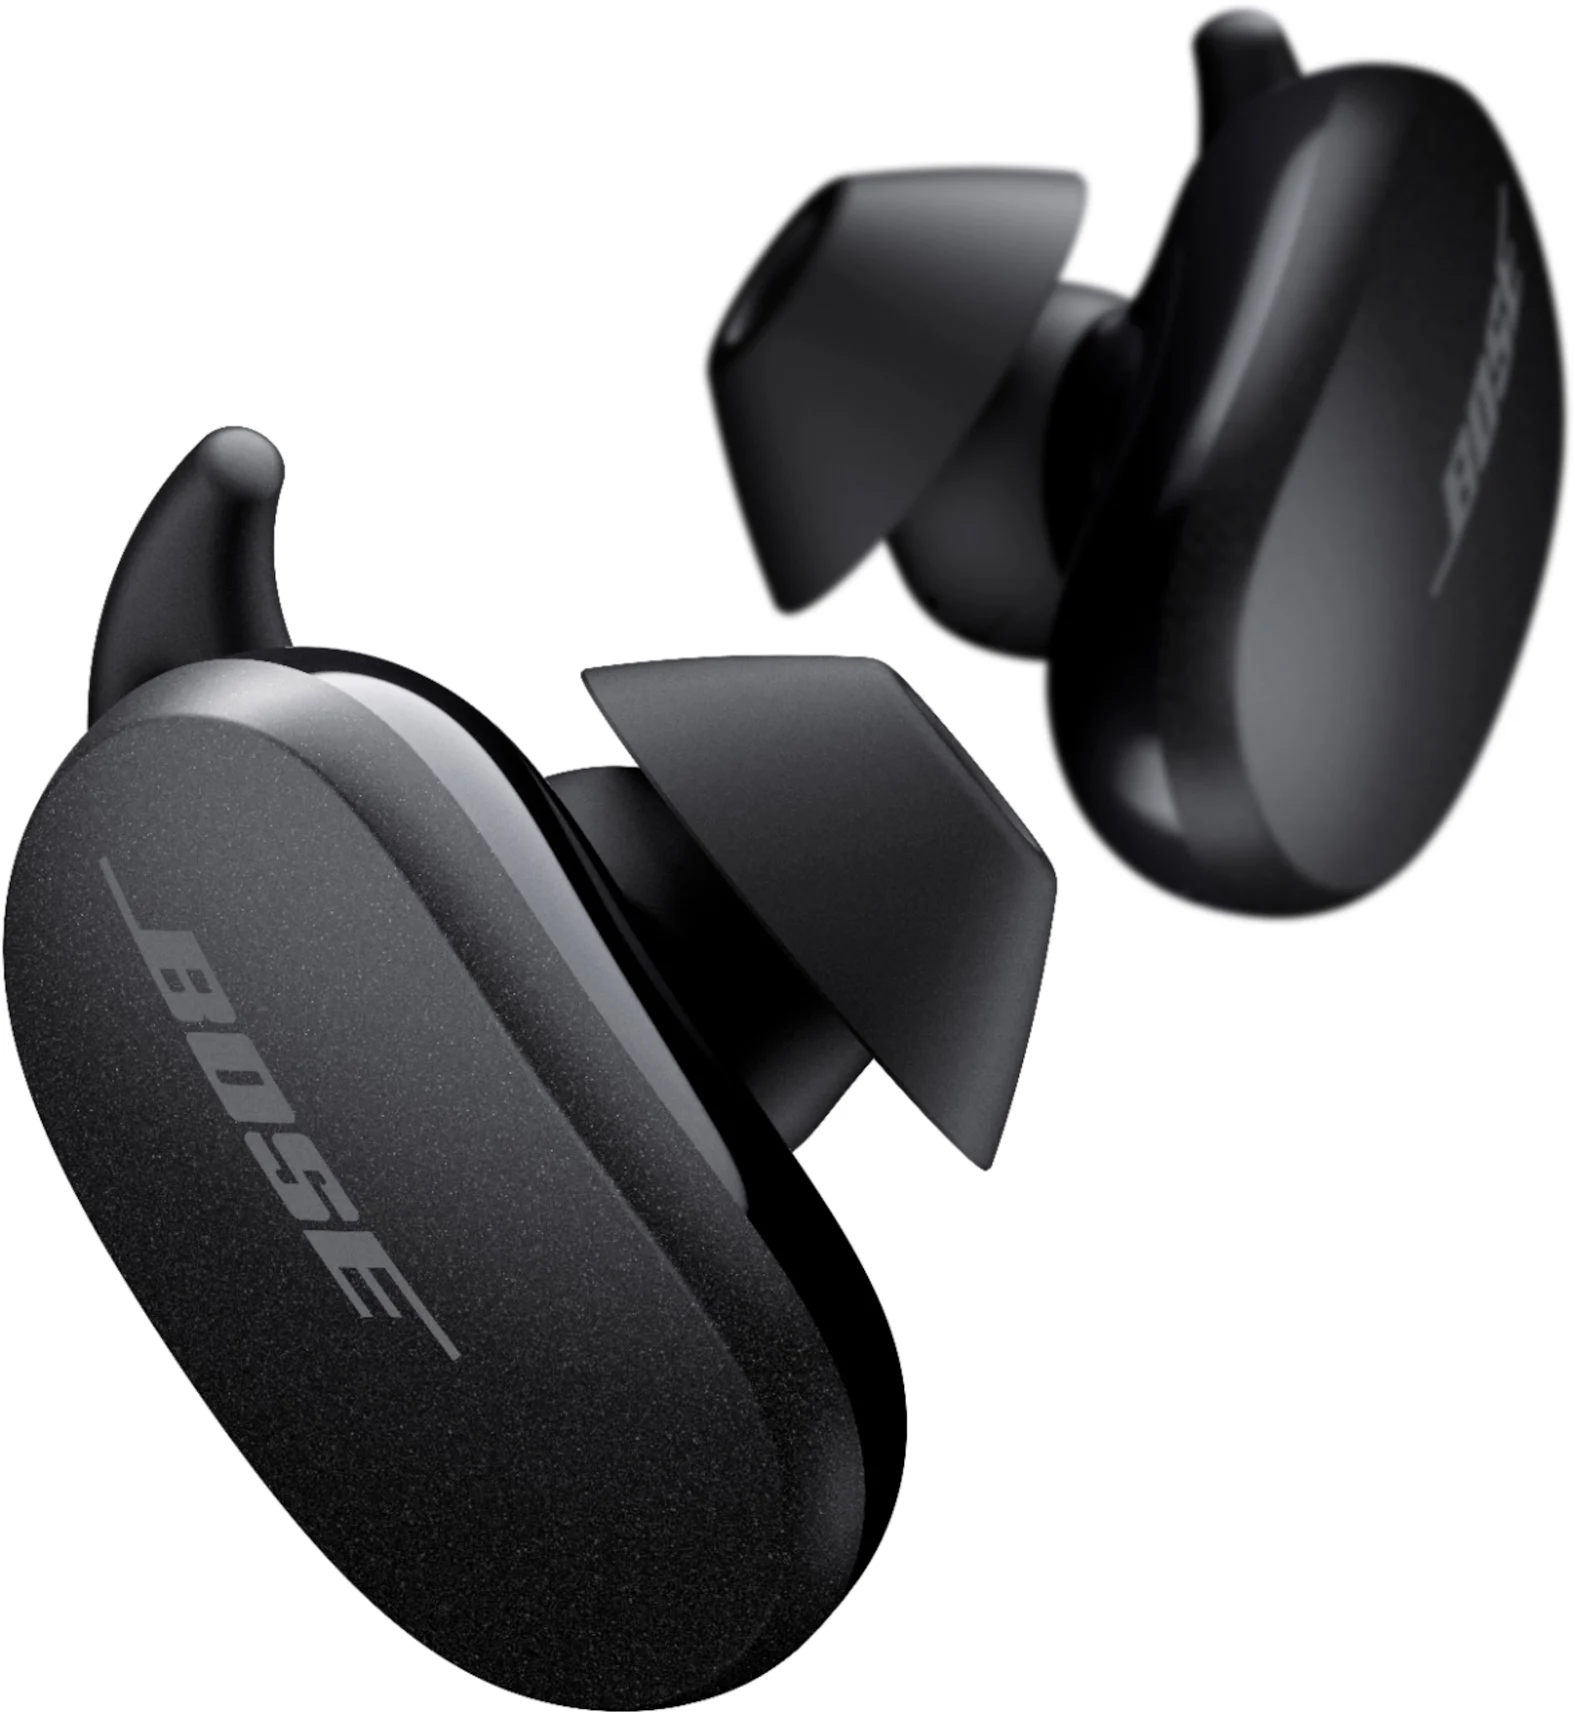  NEW Bose QuietComfort Wireless Noise Cancelling